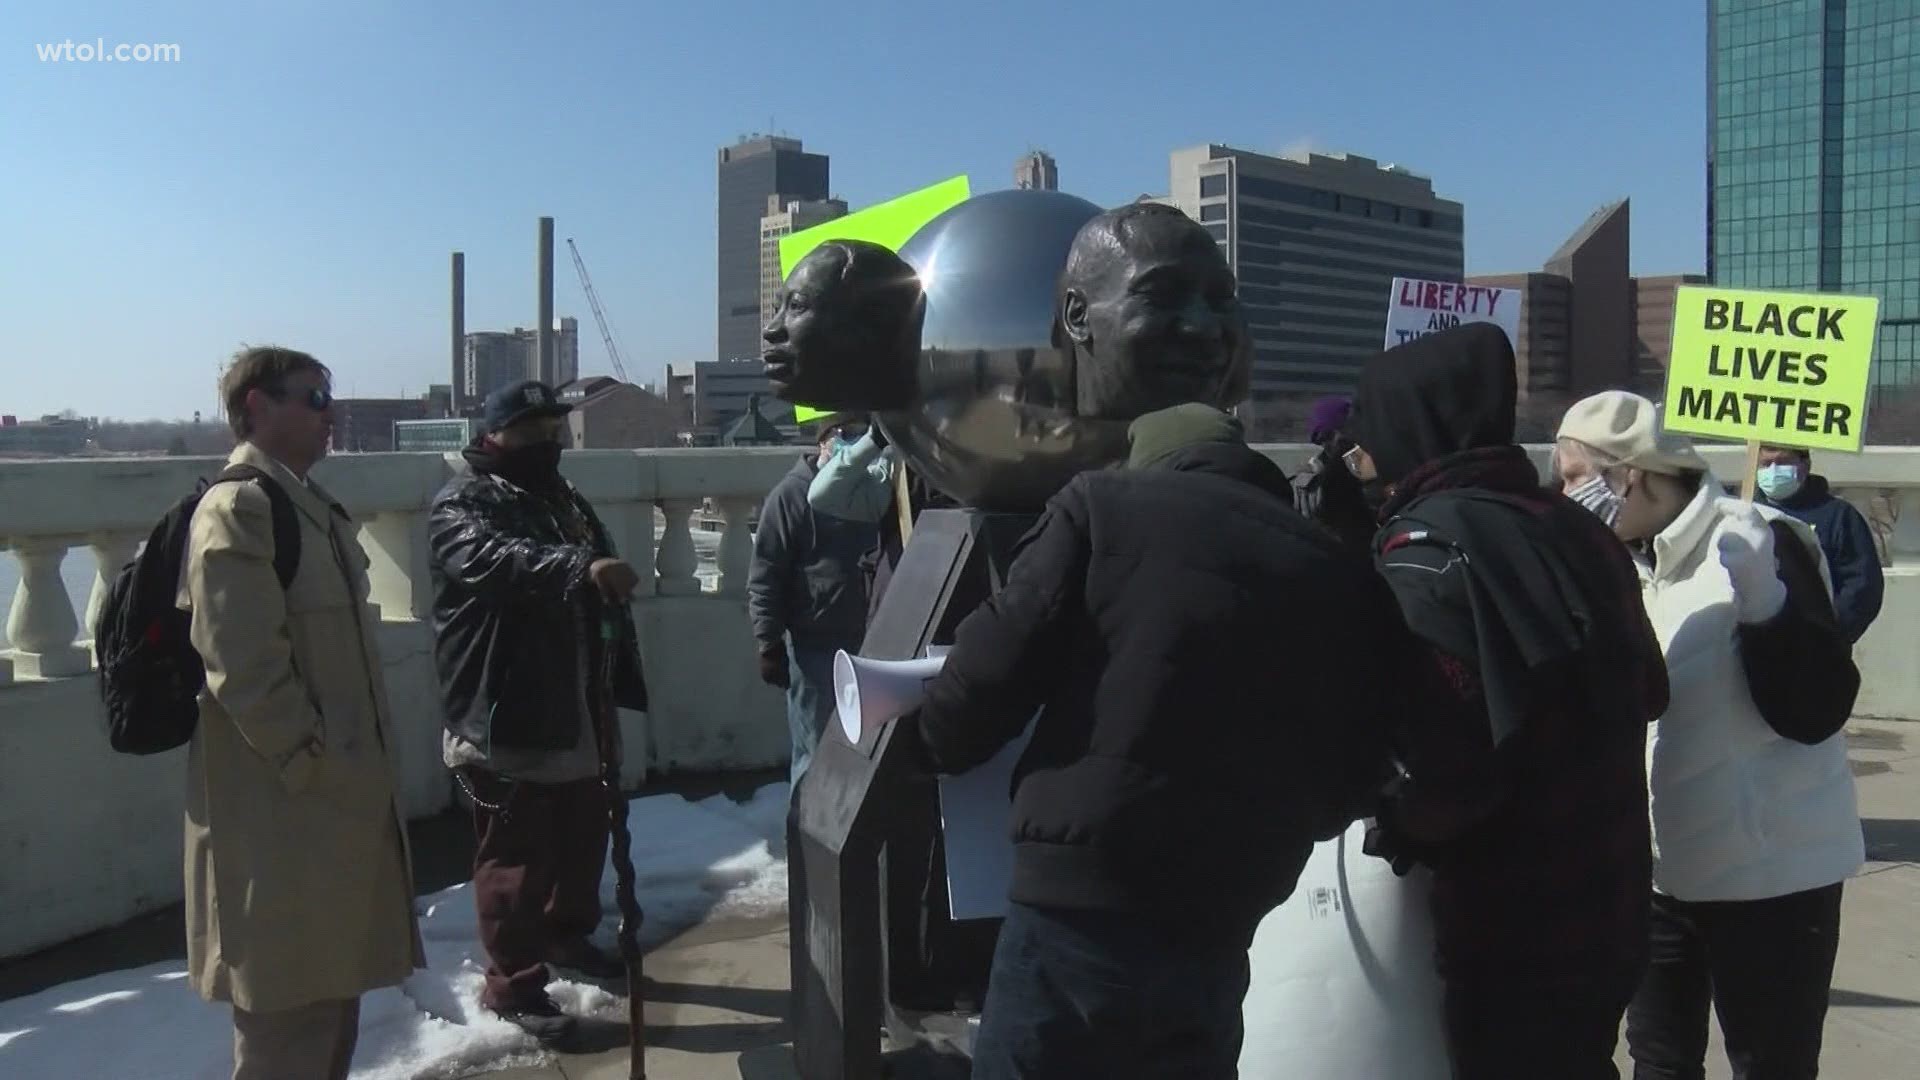 A group honoring John Lewis marched across Toledo's MLK bridge on Saturday, signifying the historic marches across the Edmund Pettus Bridge in Alabama.